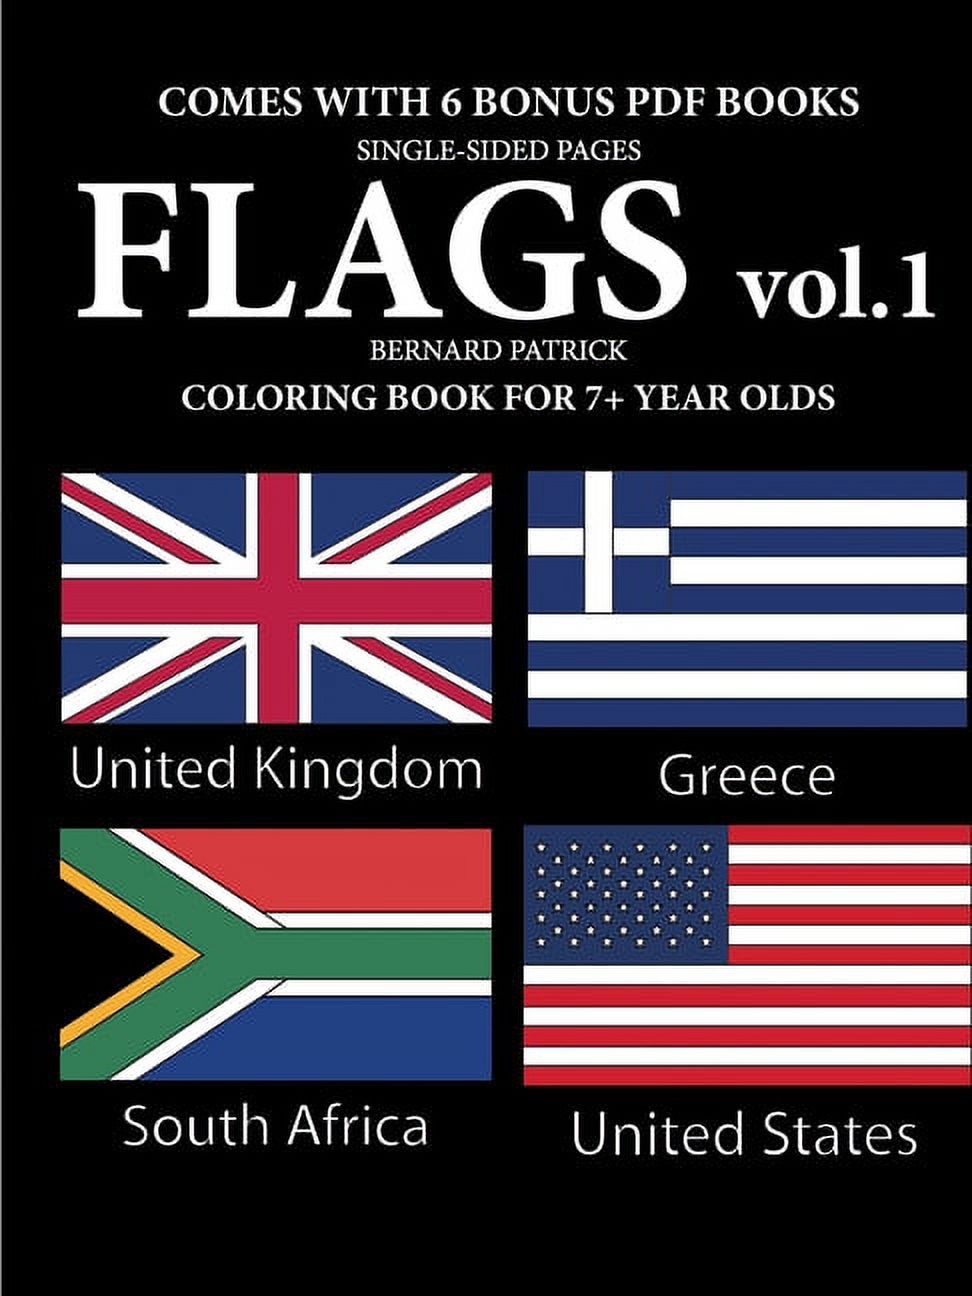 Coloring Books for 7+ Year Olds (Flags Volume 1) (Paperback) 